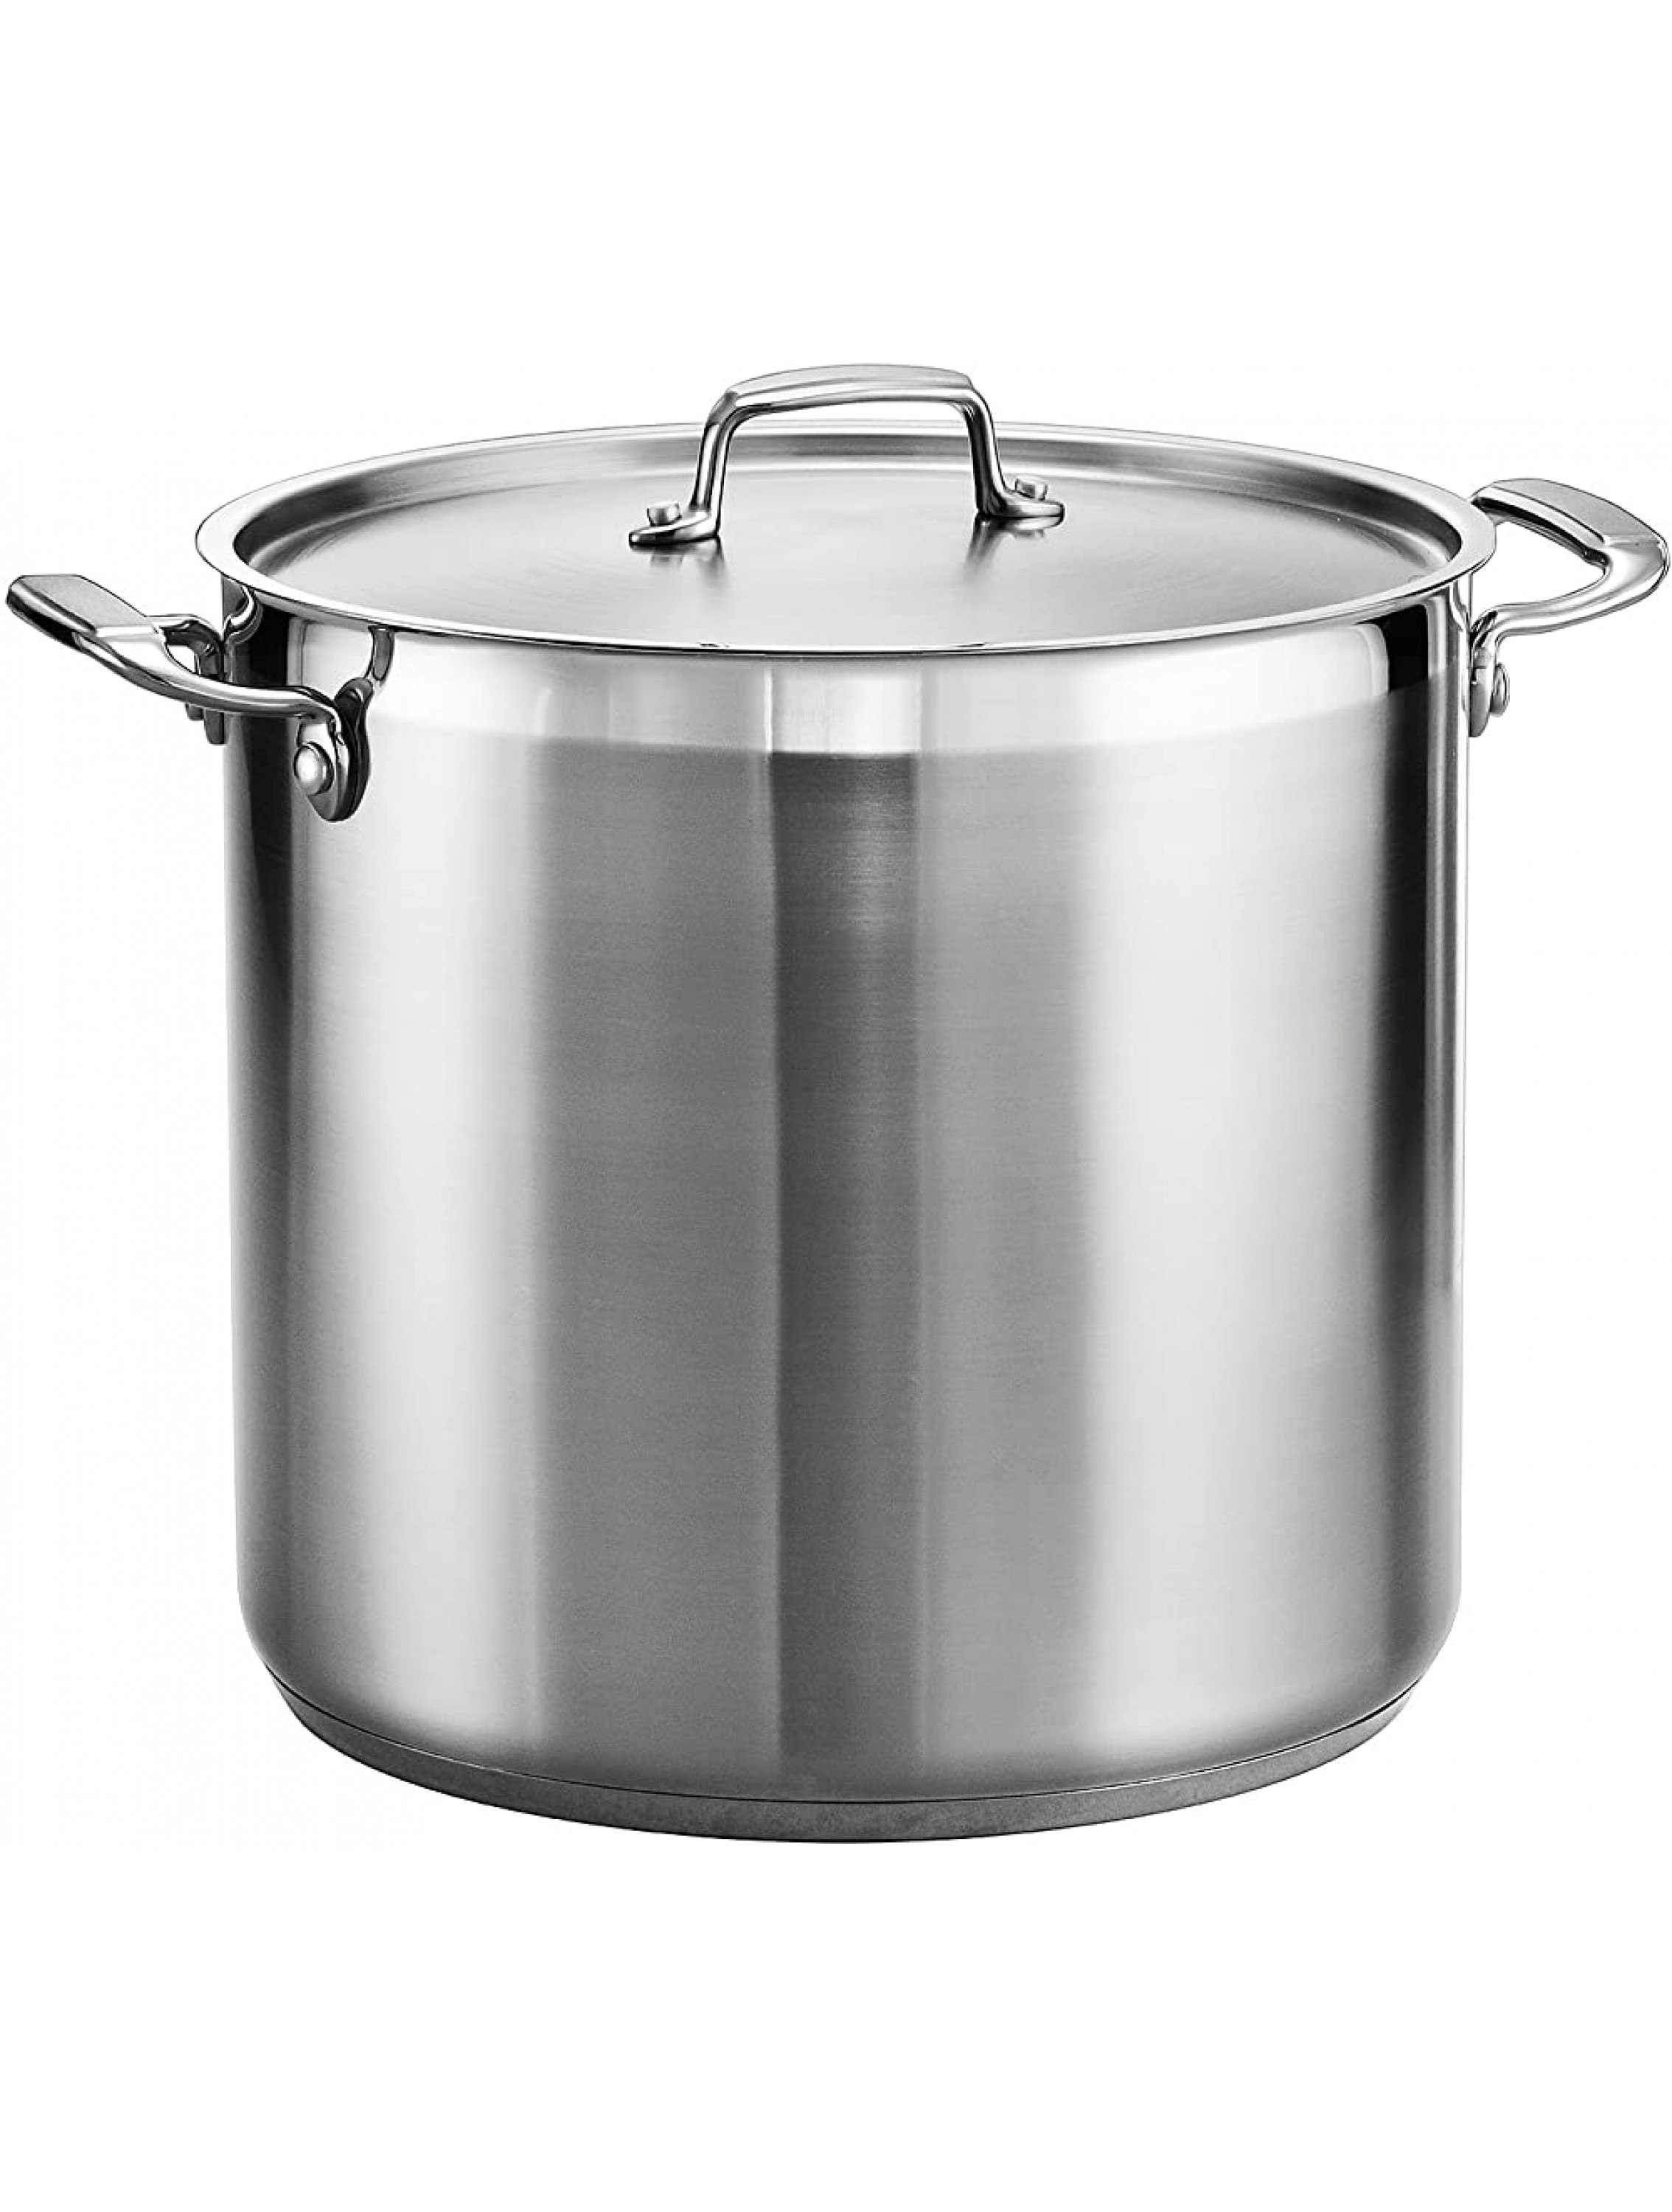 Tramontina Covered Stock Pot Gournmet Stainless Steel 20 Qt 80120 002DS - B6YUP76AK